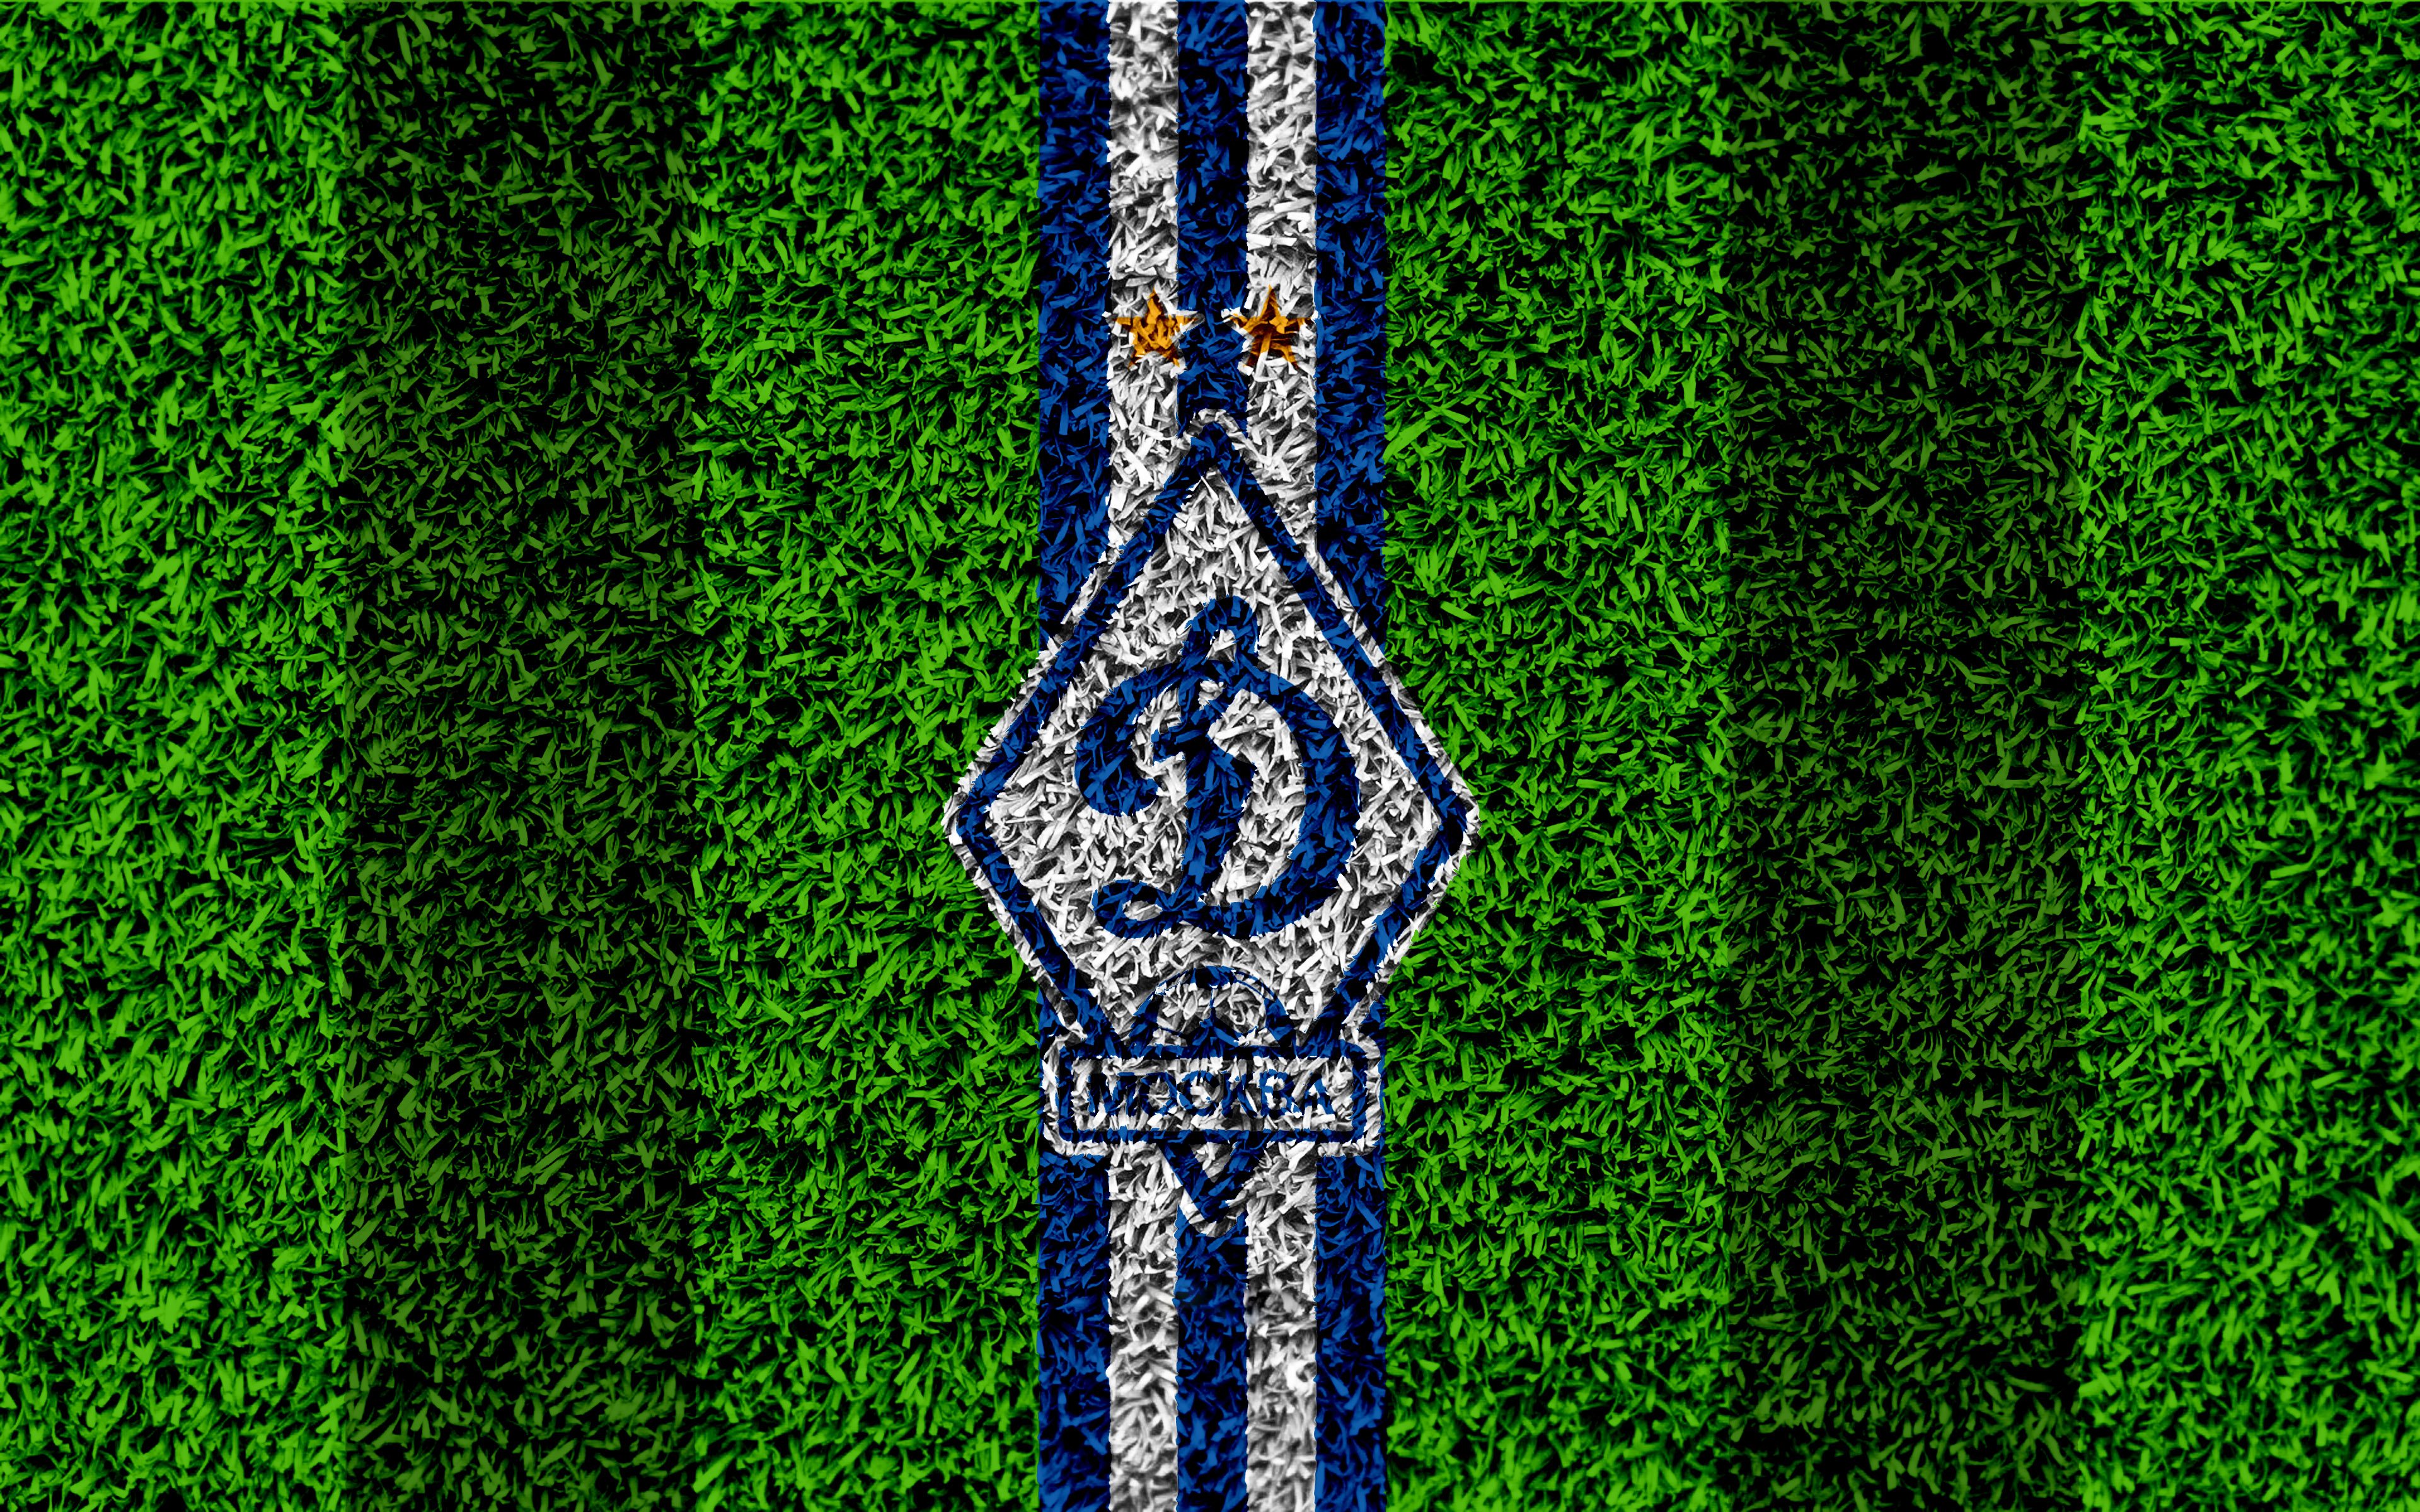 Sports FC Dynamo Moscow HD Wallpaper | Background Image